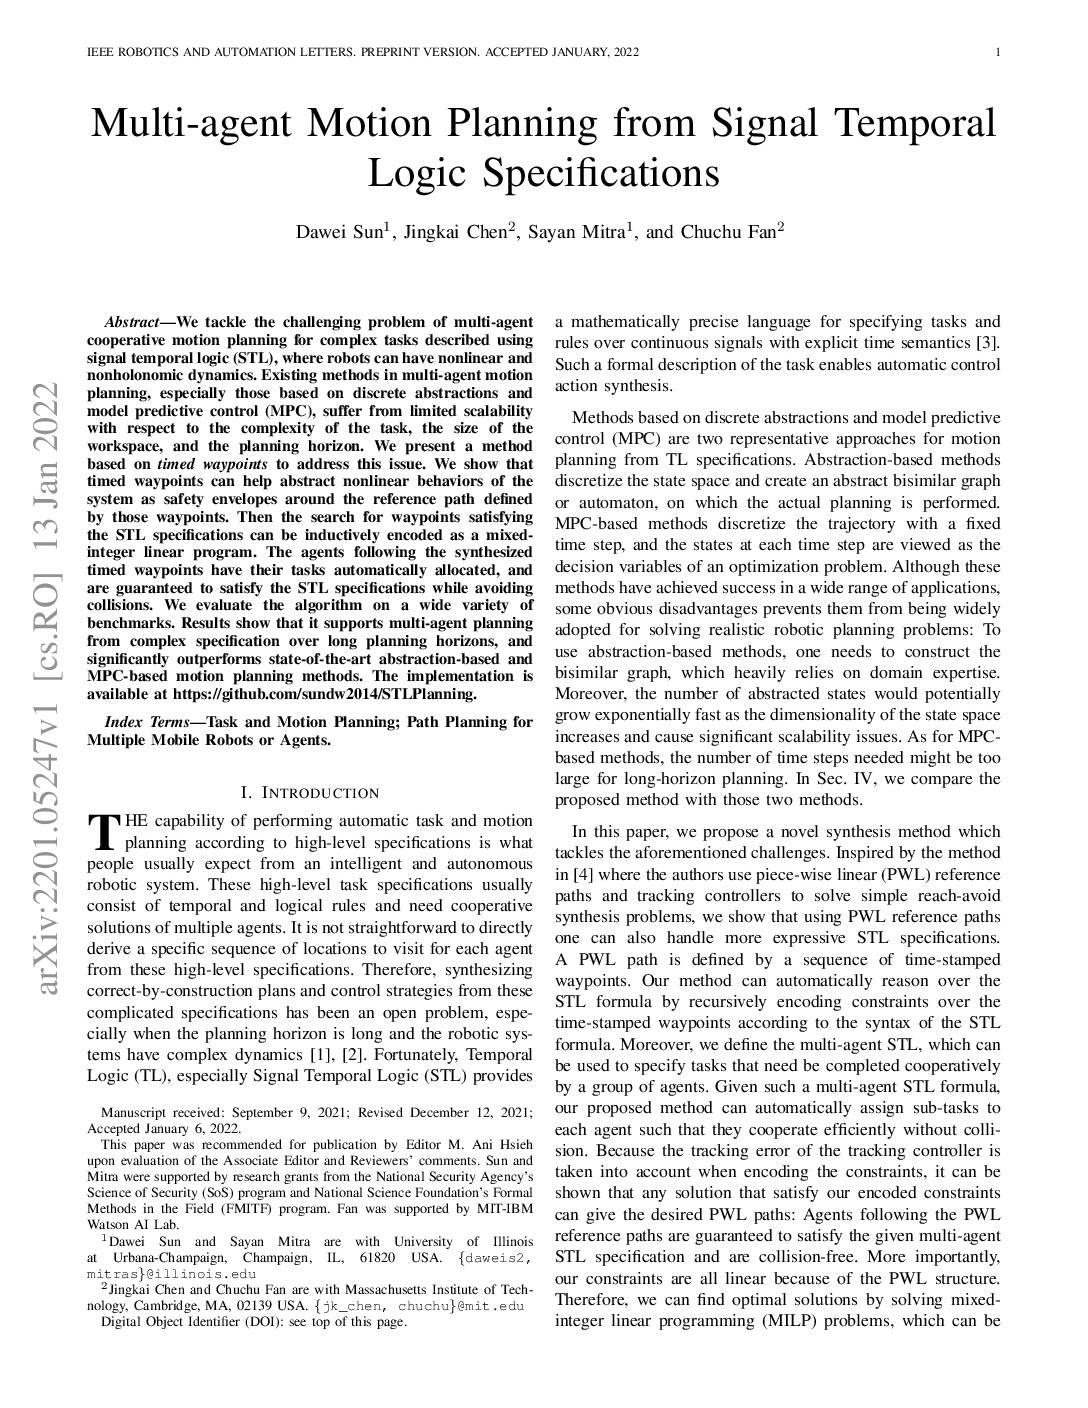 Multi-agent Motion Planning from Signal Temporal Logic Specifications